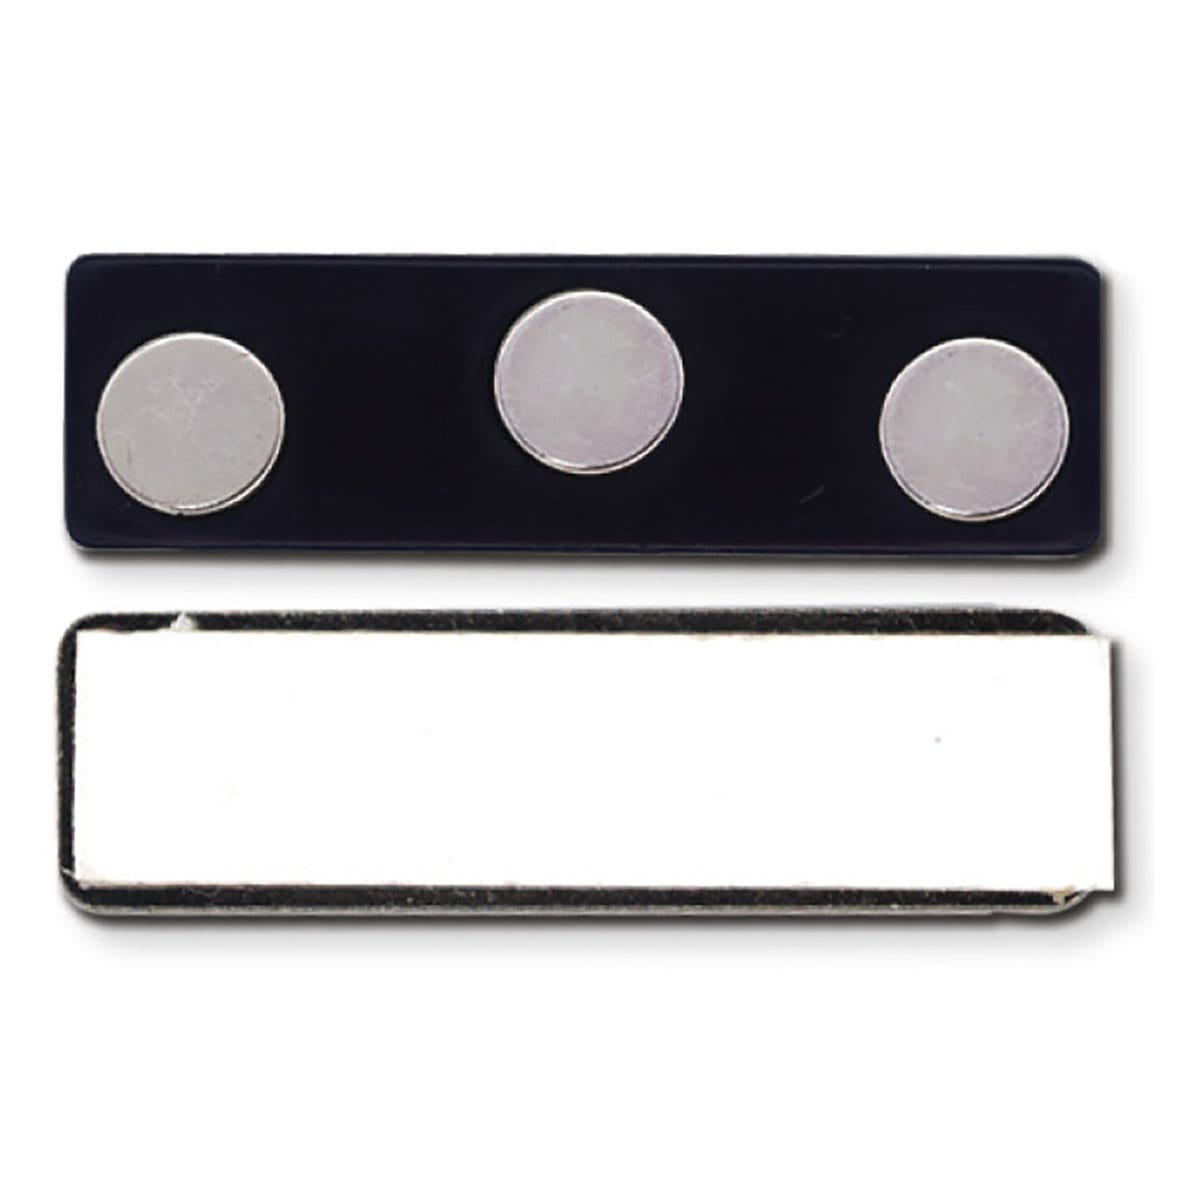 Magnetic Badge Finding, 3 Round Magnets (P/N 5730-3040) 5730-3040